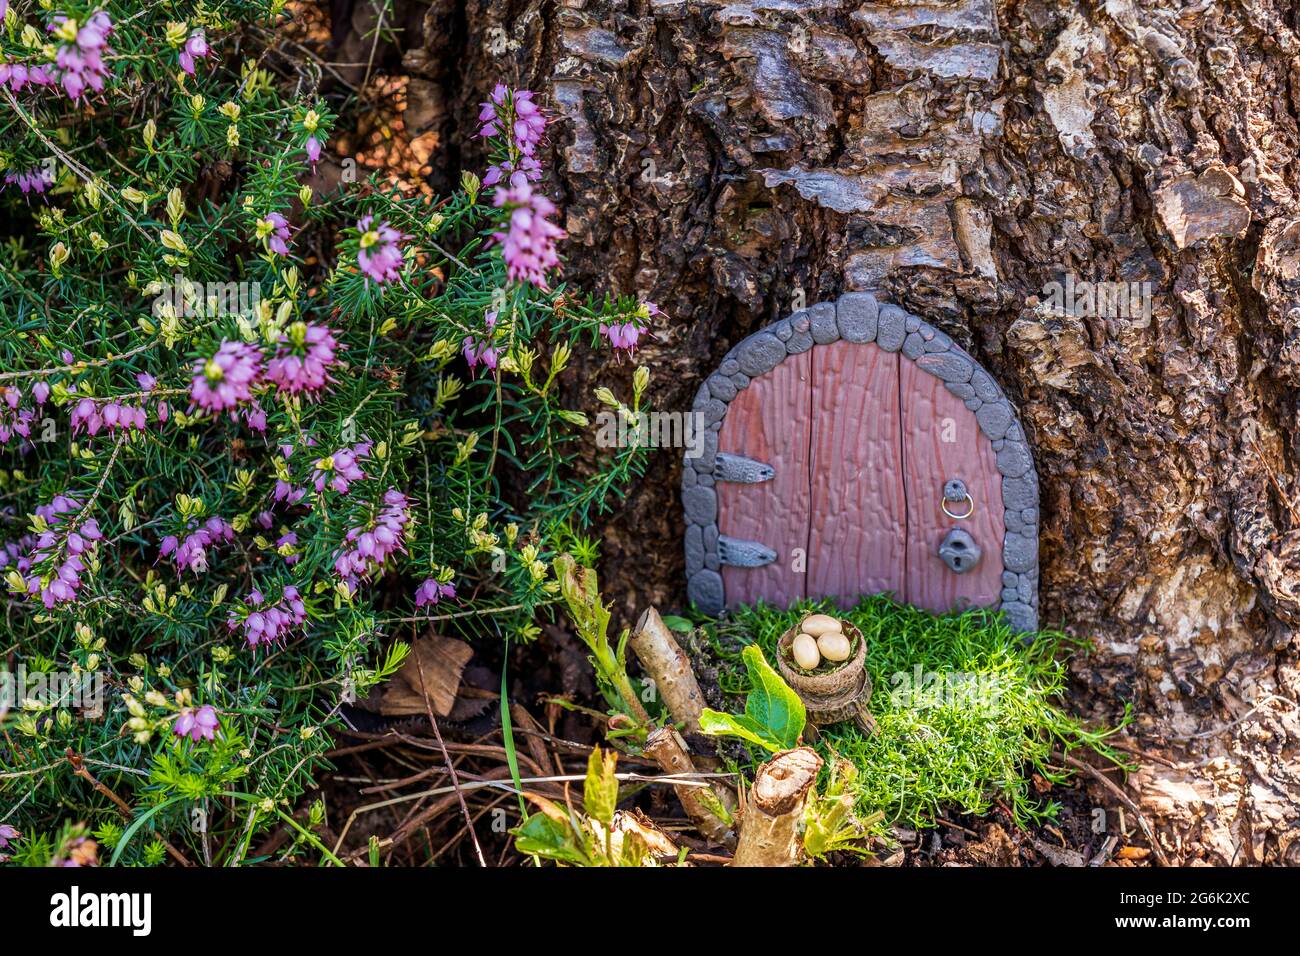 Little fairy tale door made from clay in a tree trunk with purple flowers. Stock Photo